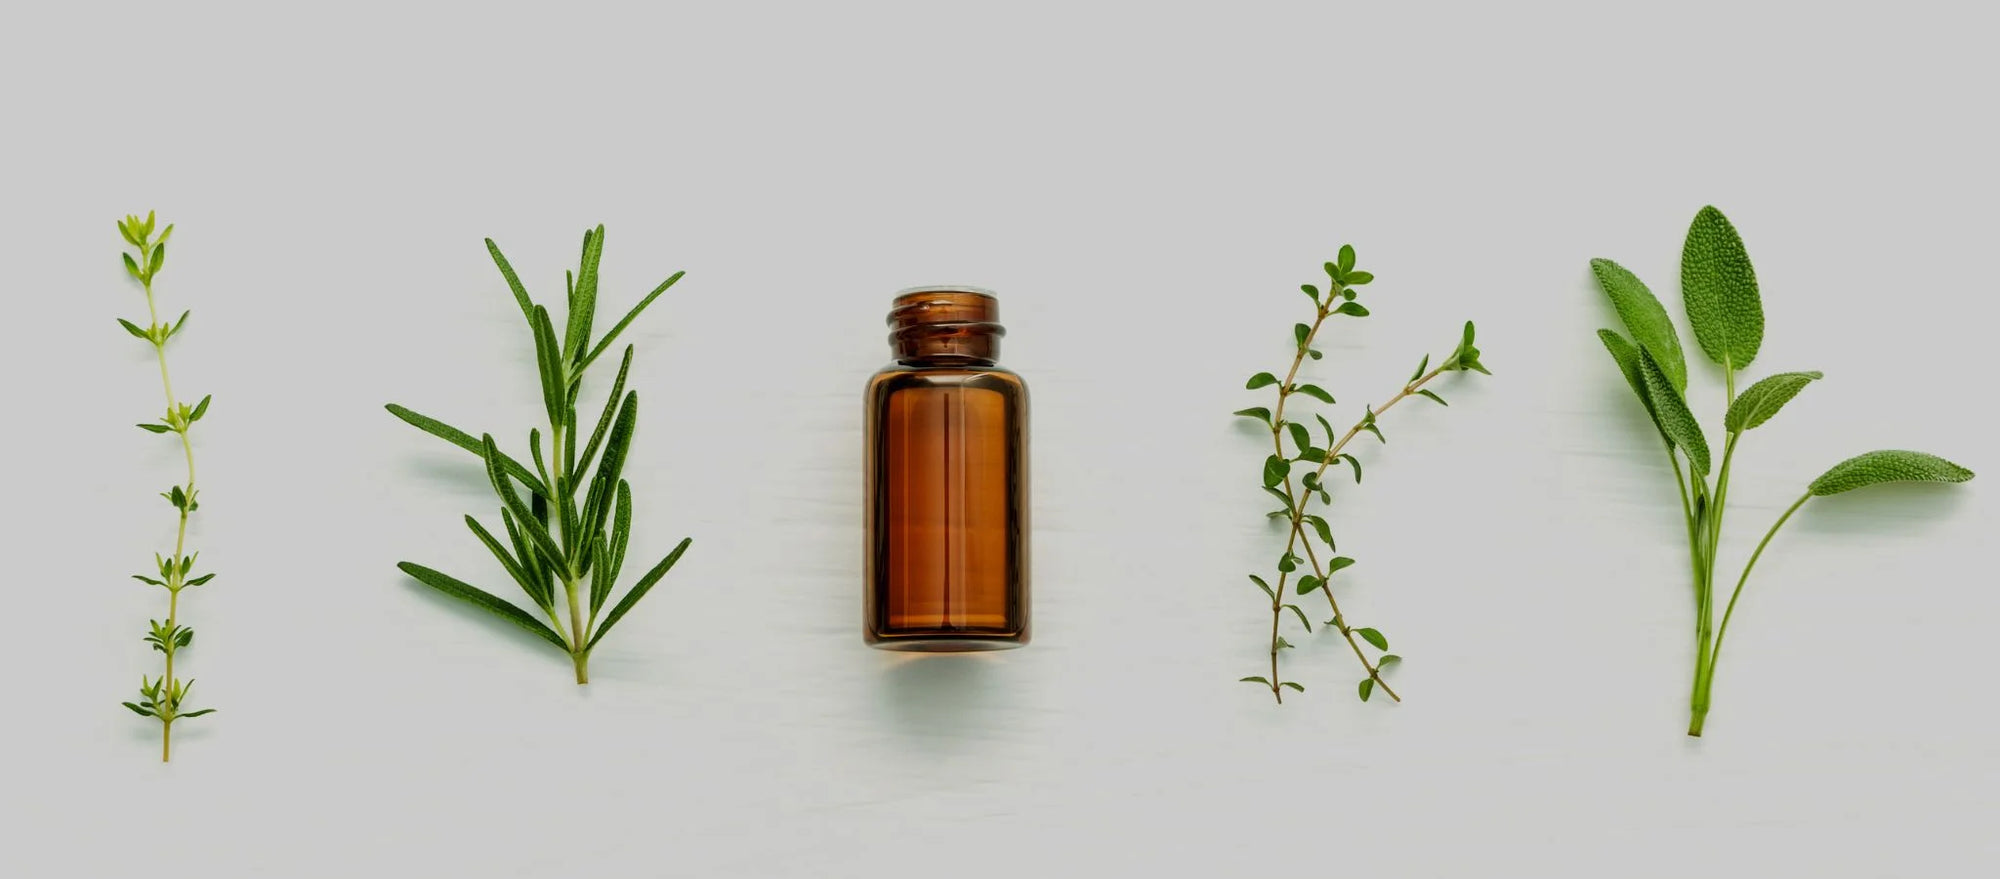 Image of a bottle of Clary Sage Oil, known for its effectiveness as one of the essential oils for pain relief. Featured in the '10 Best Essential Oils for Pain Relief in 2023' post by MDBiowellness- Plant Medicine, a trusted brand developed by doctors.